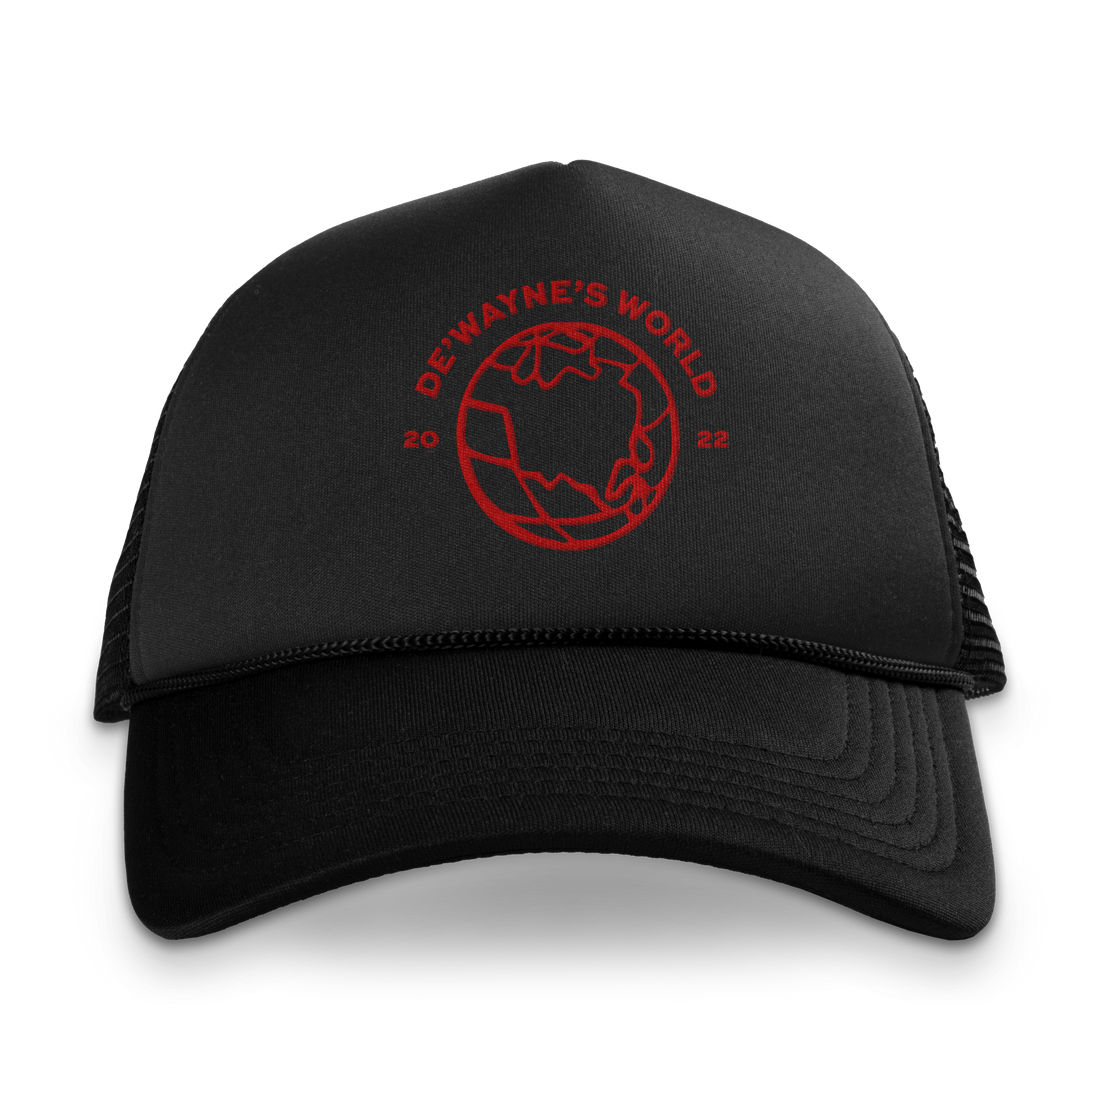 DIE OUT HERE TOUR TRUCKER HAT